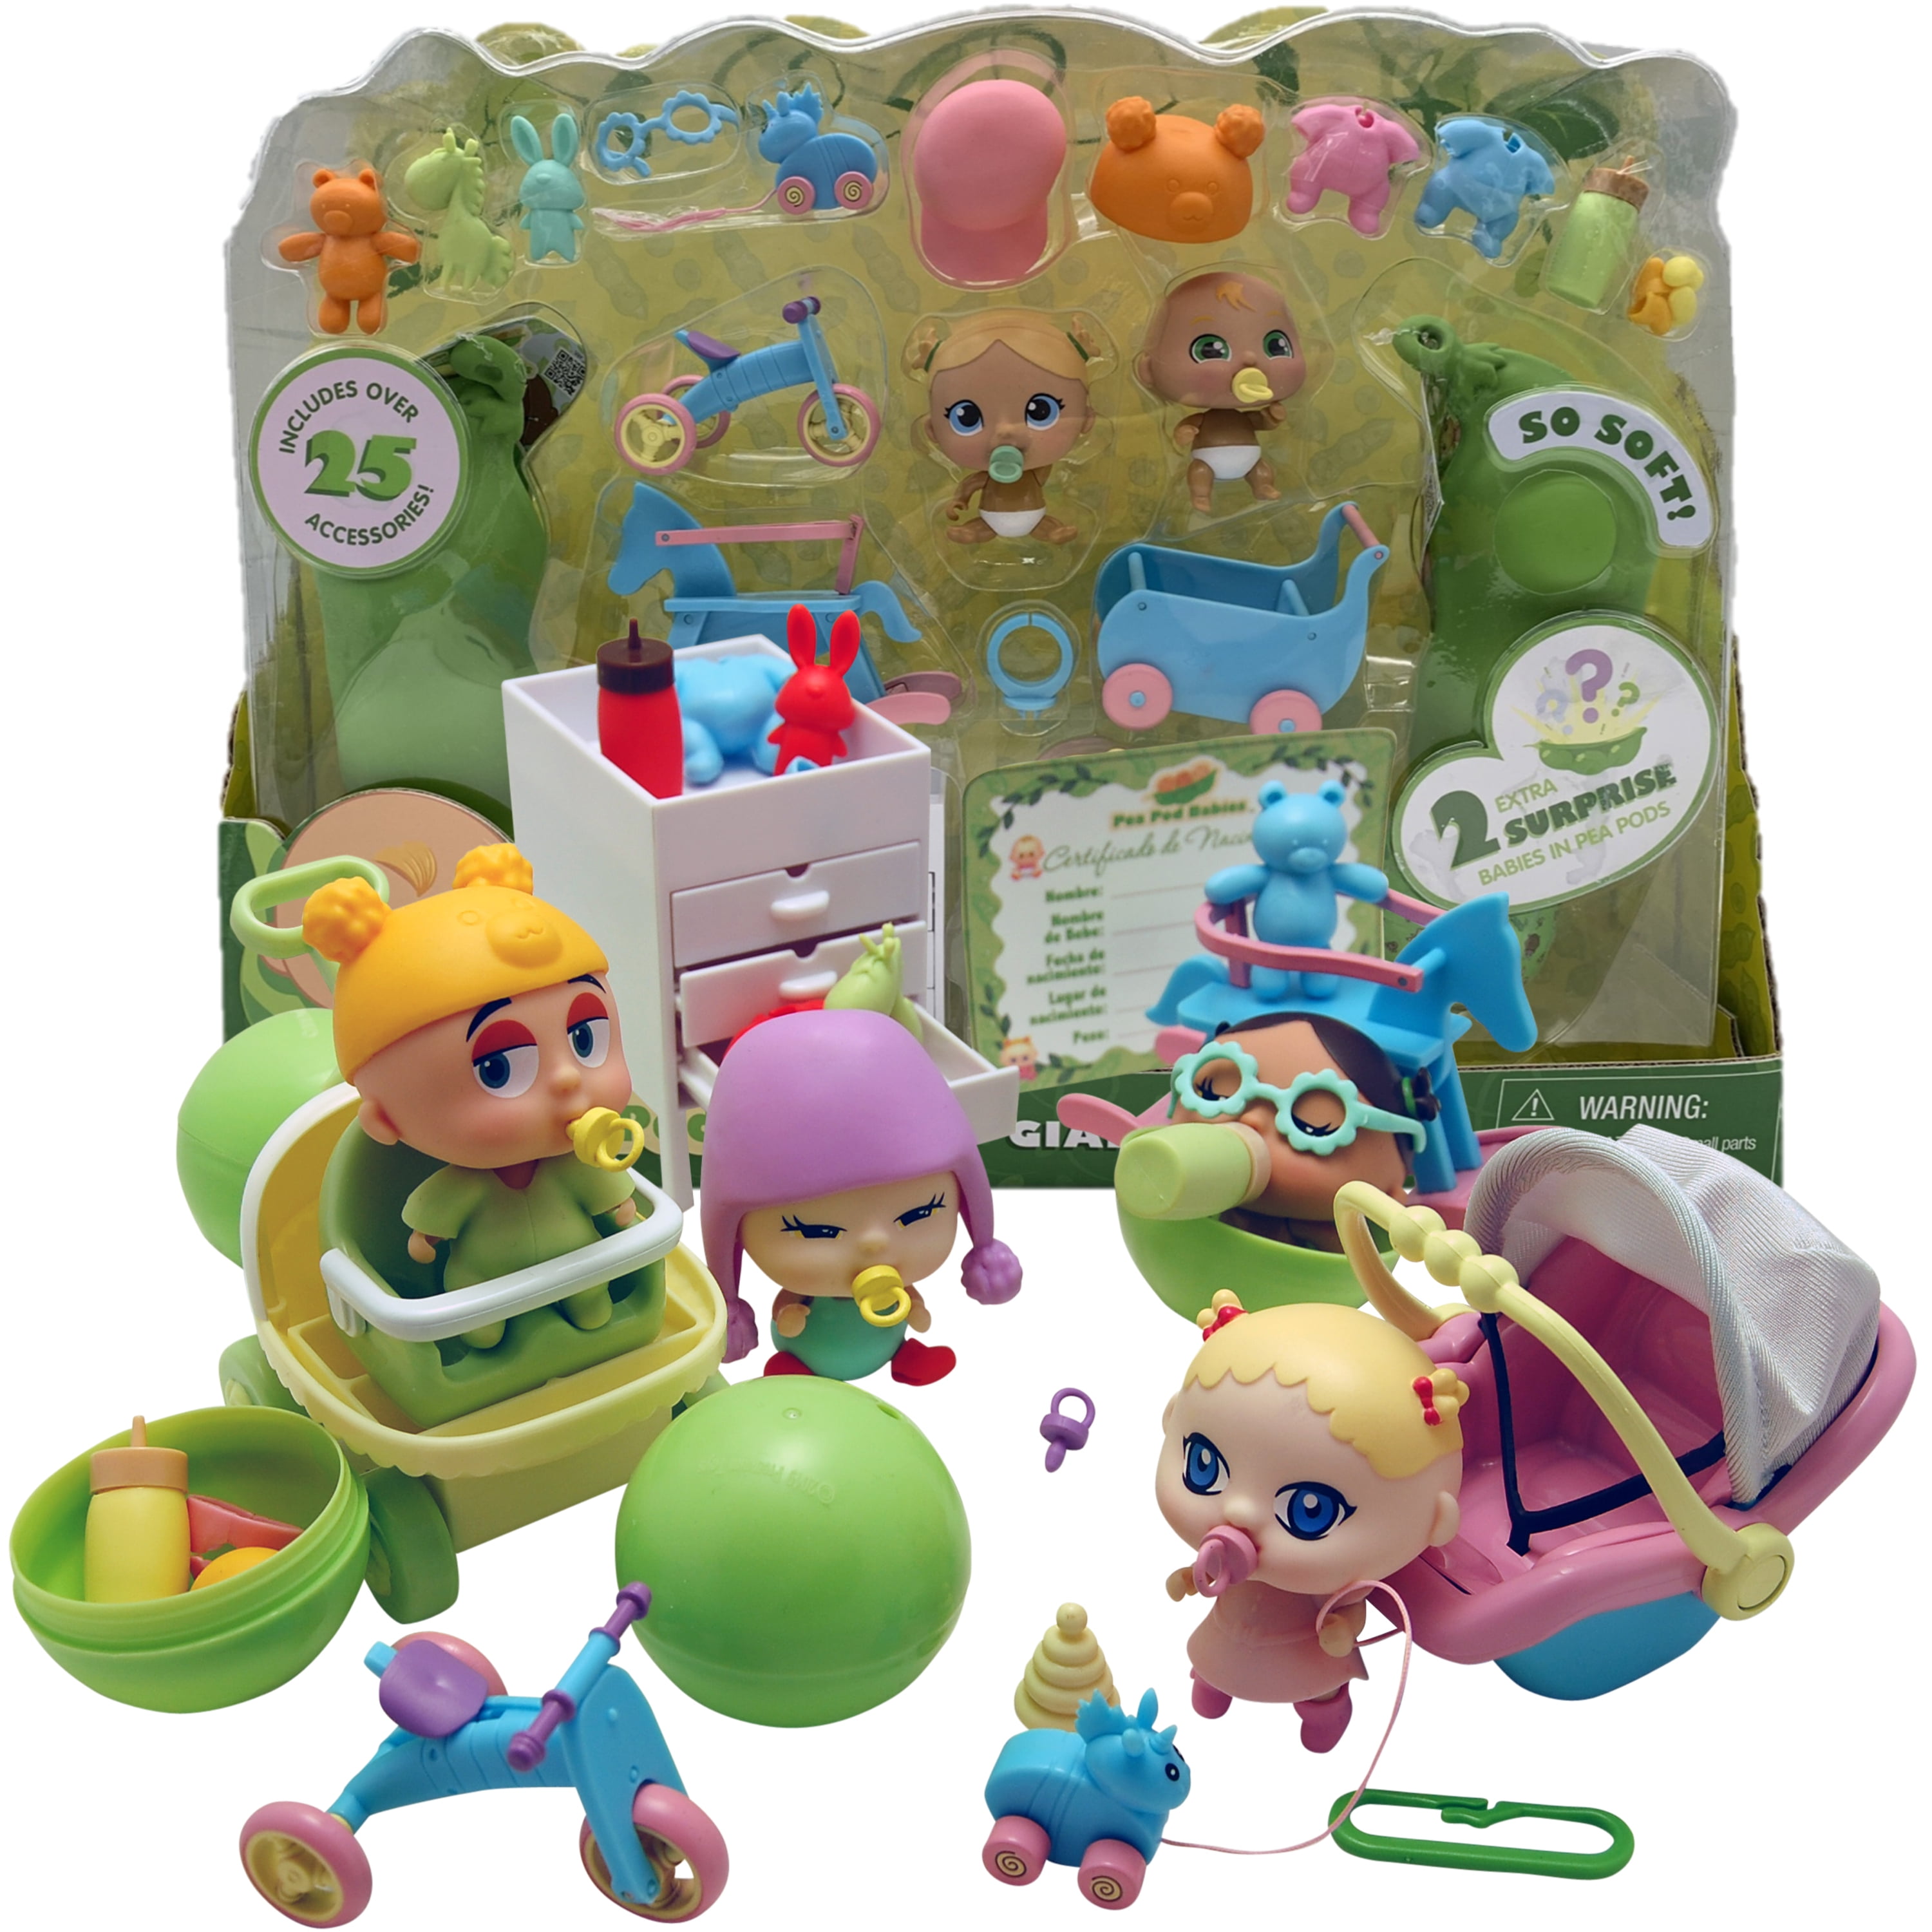 Peas In A Pod Baby /& Me Peapod Gift Set